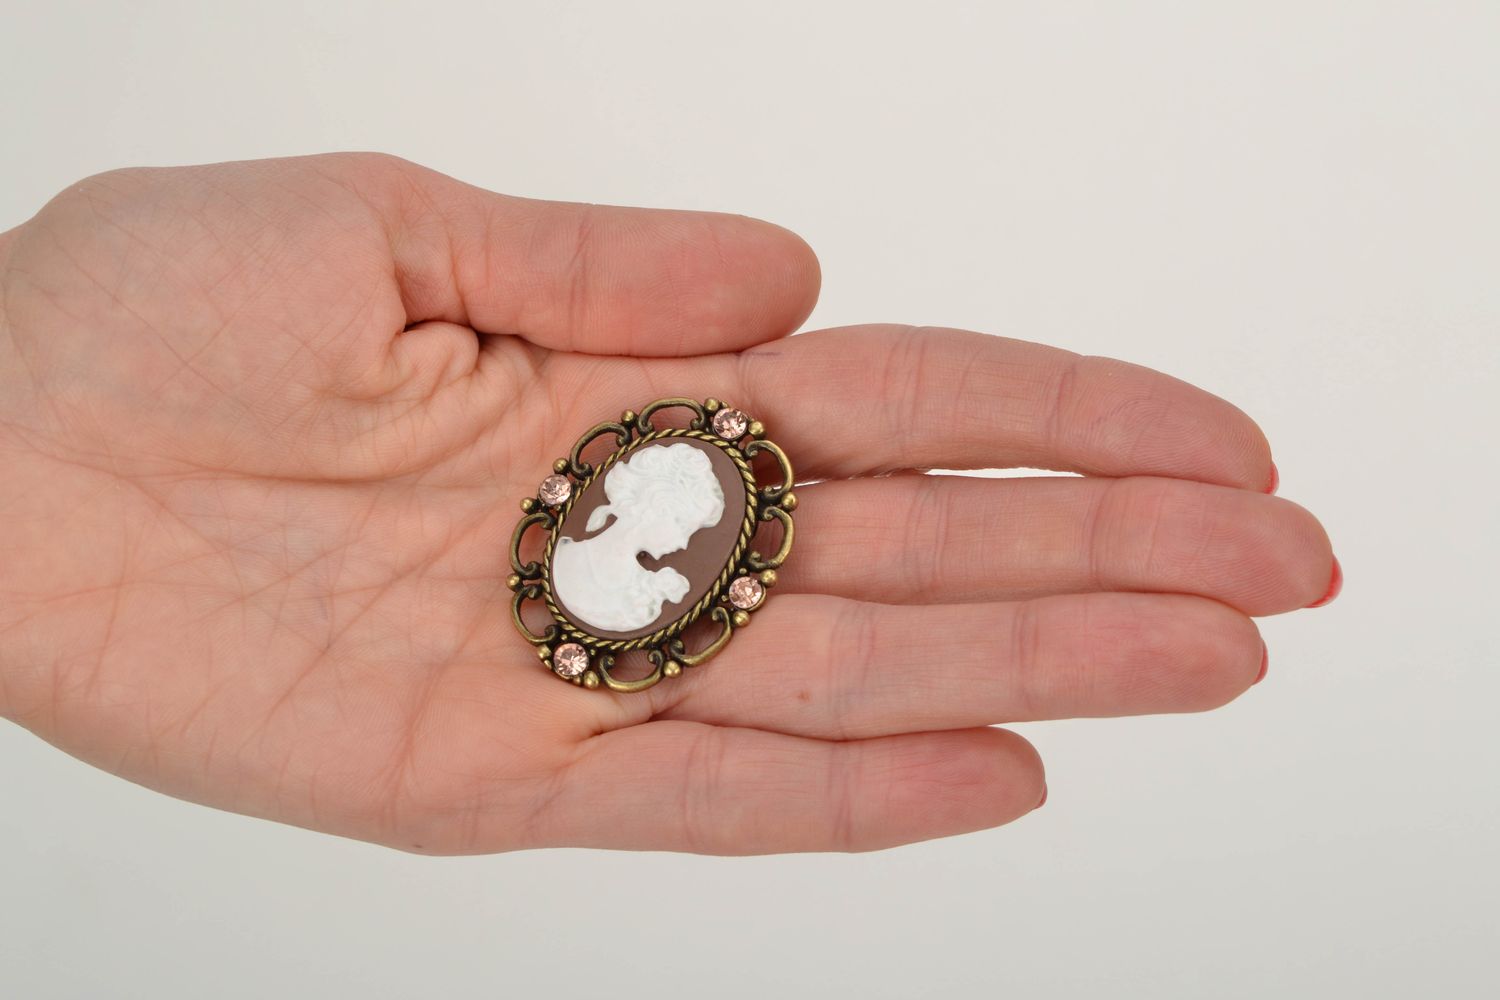 Metal cameo brooch in retro style photo 2